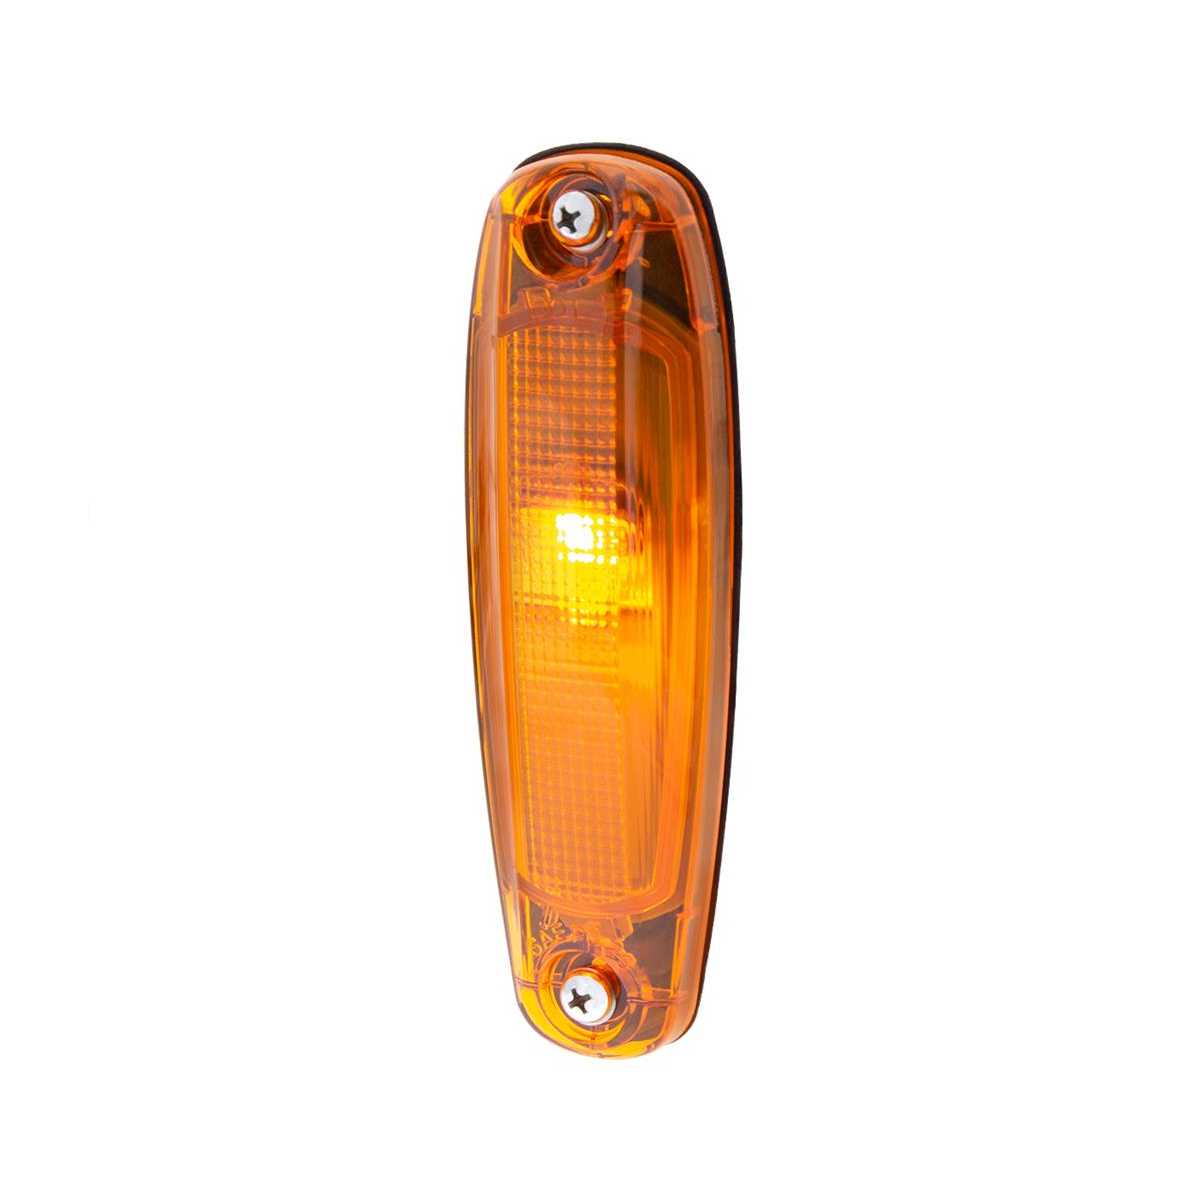 2 Amber LED Cab Light for 2018-2023 Freightliner Cascadia with Amber Lens